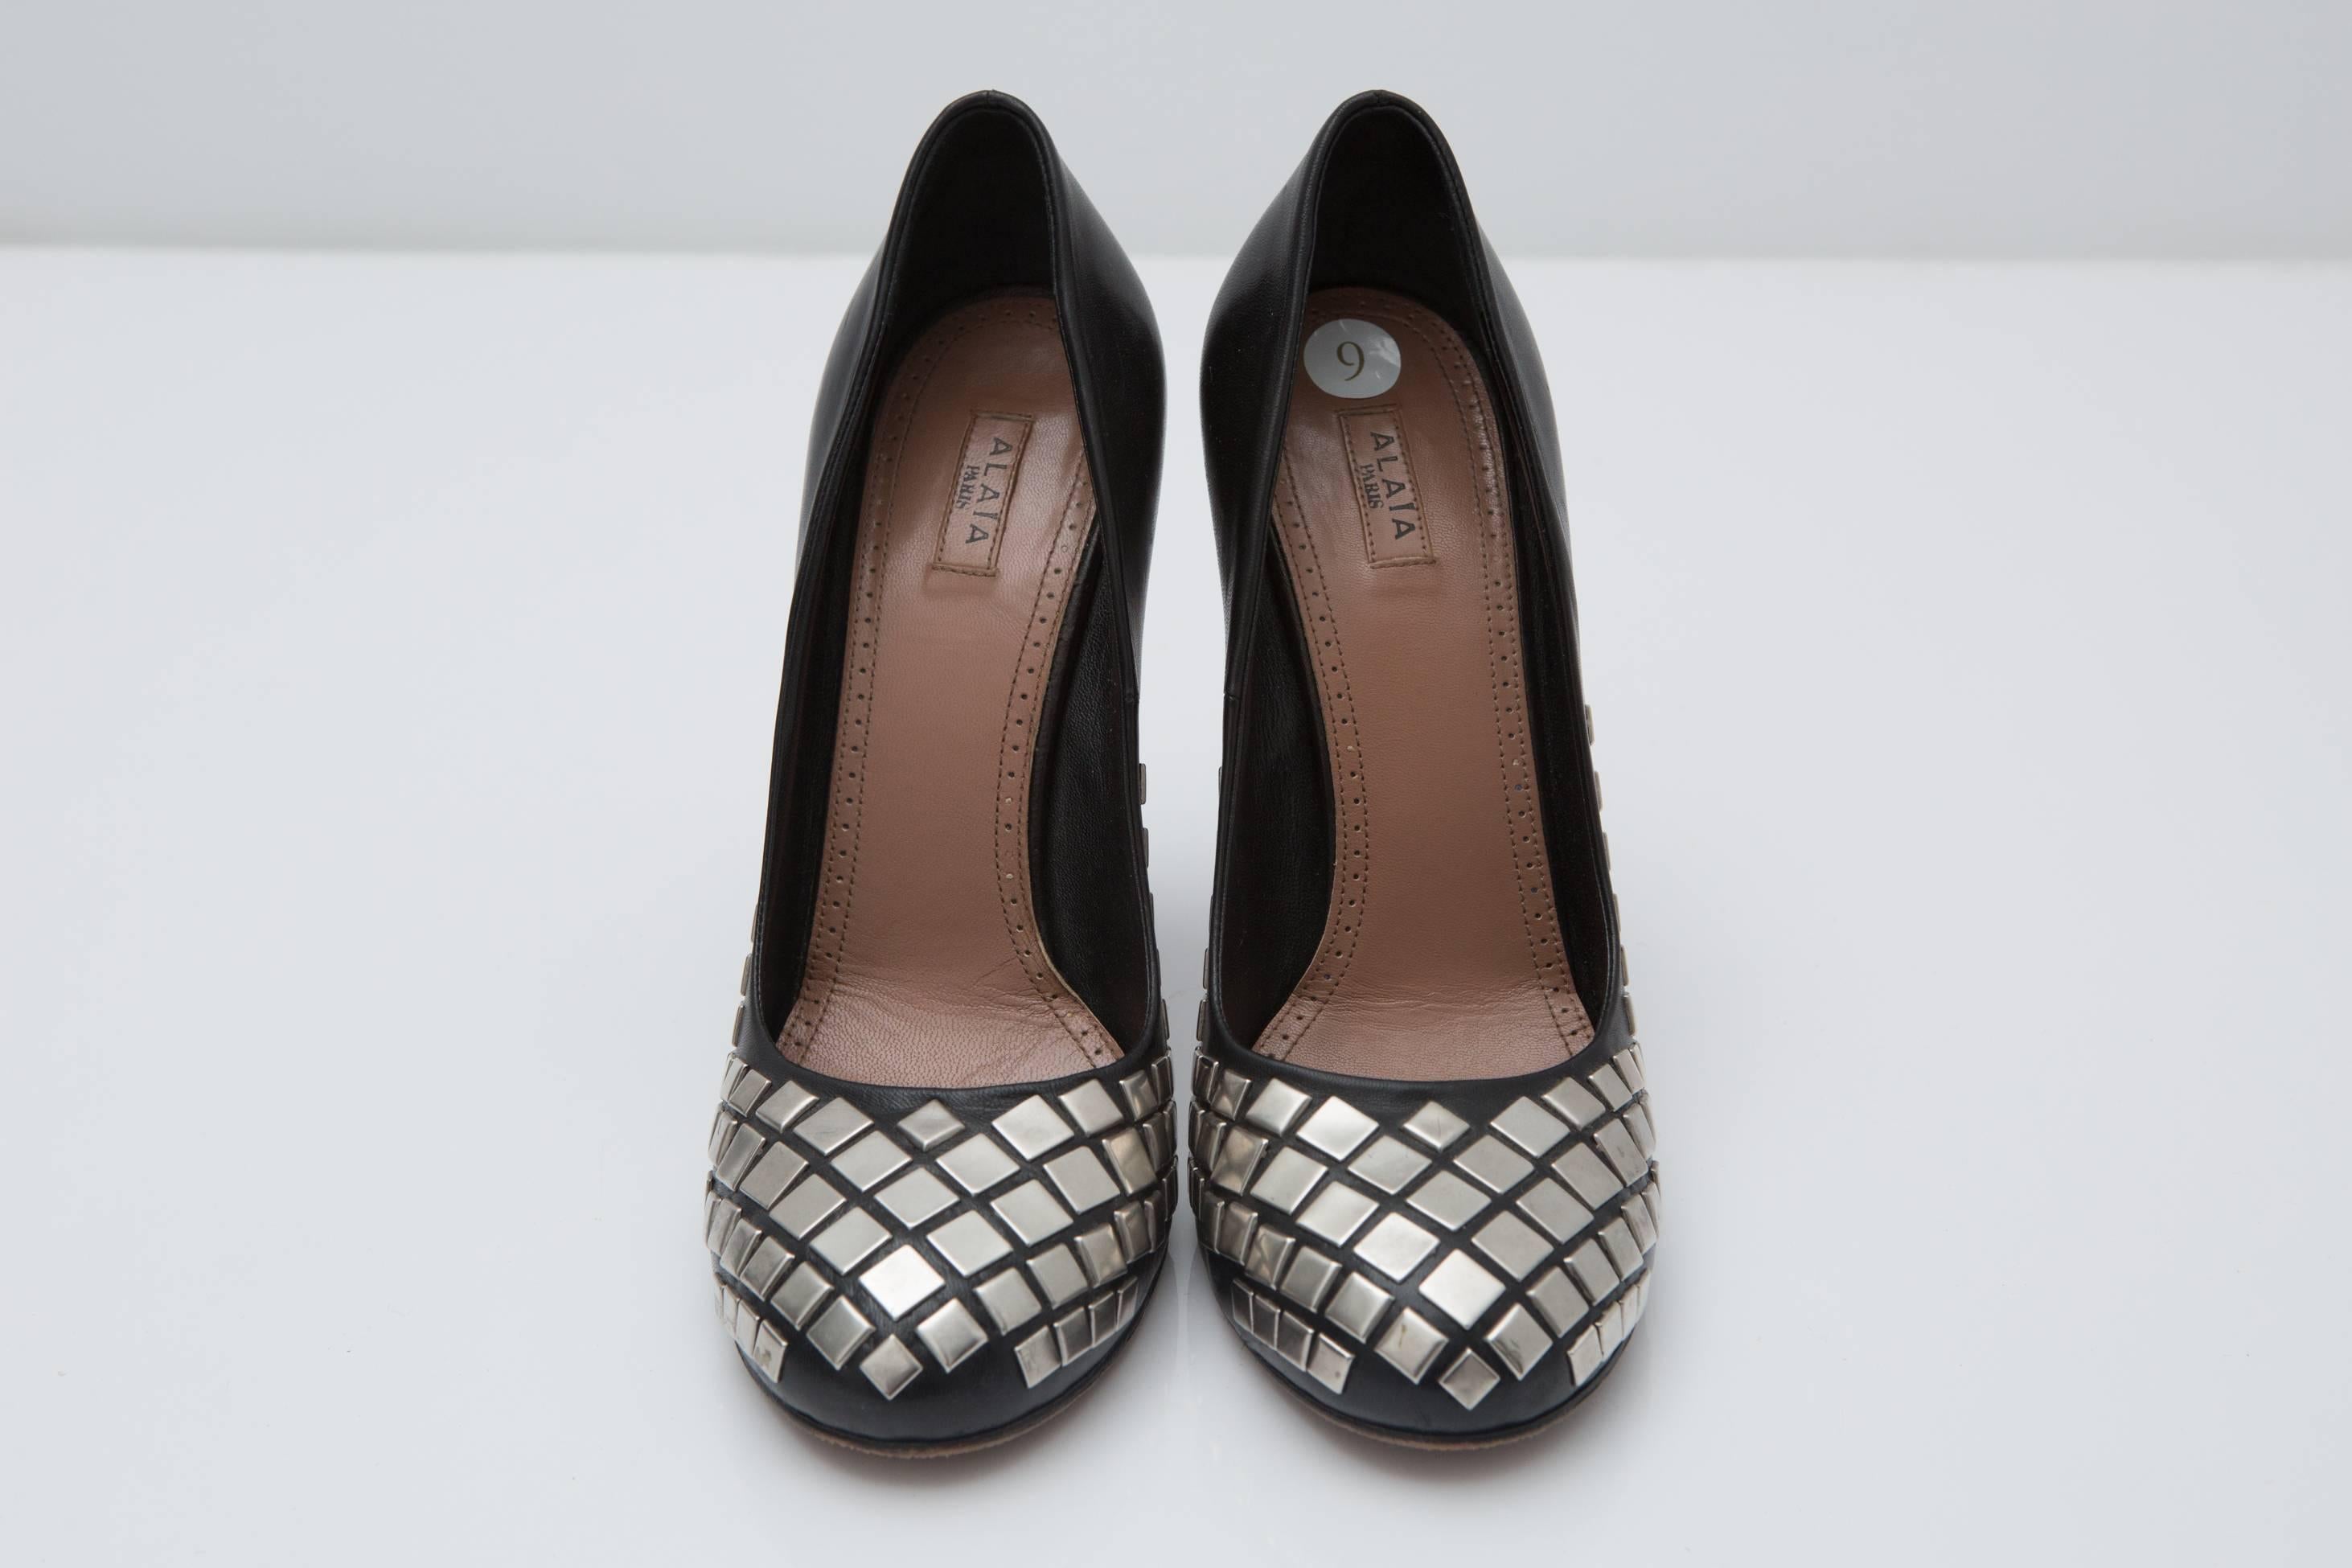 Women's Alaia Black Heeled Pumps with Silver Stud Detail